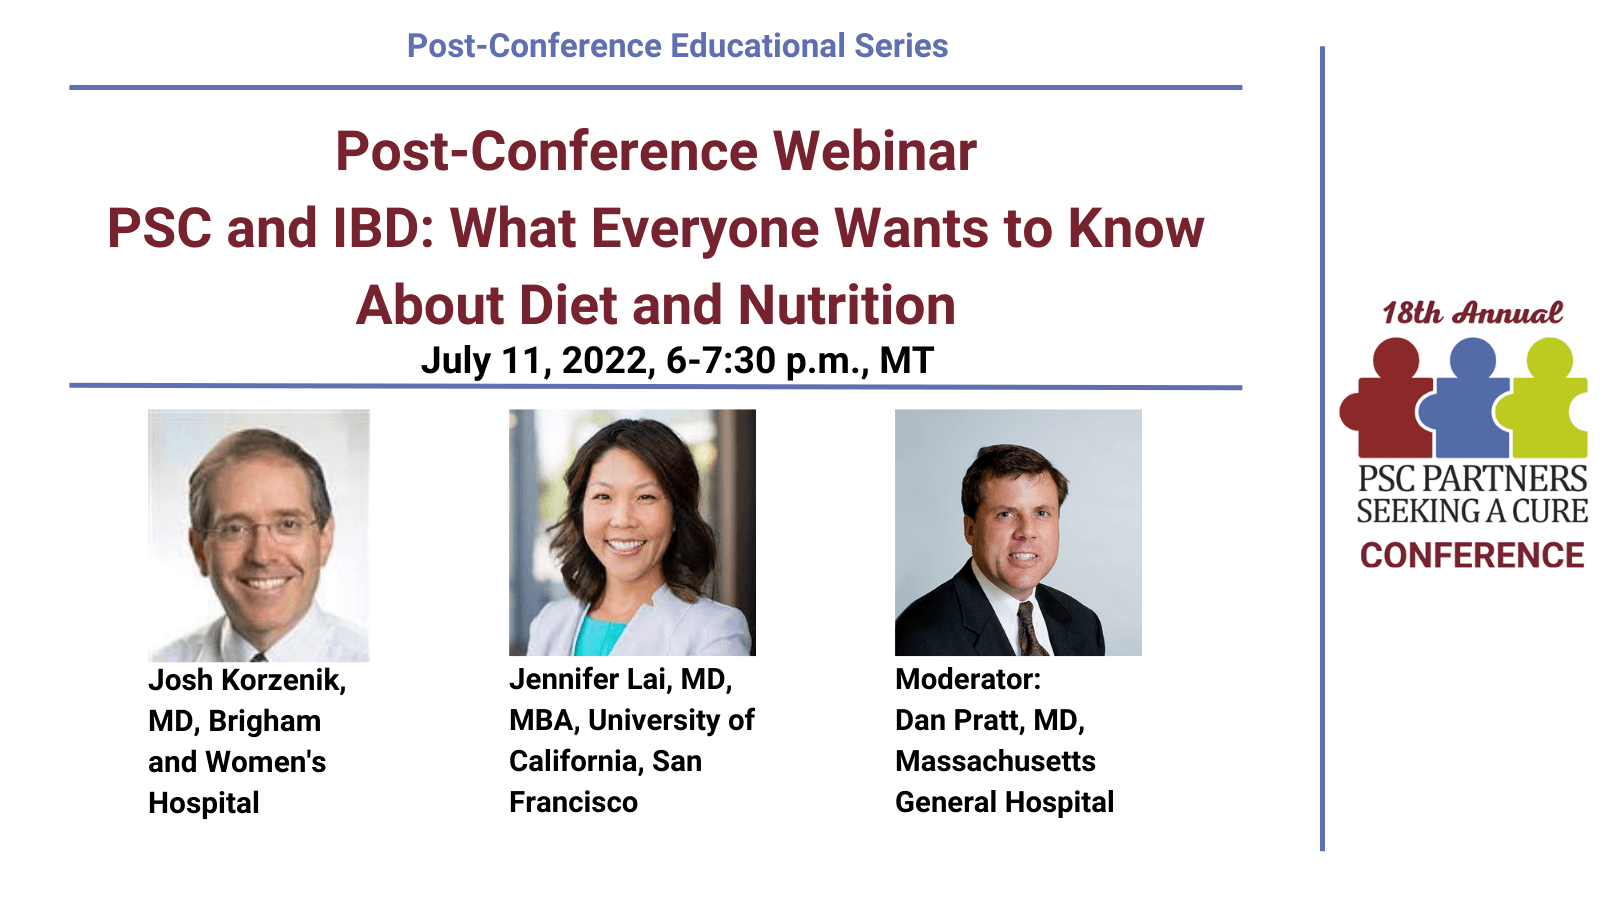 PSC and IBD: What Everyone Wants to Know About Diet and Nutrition